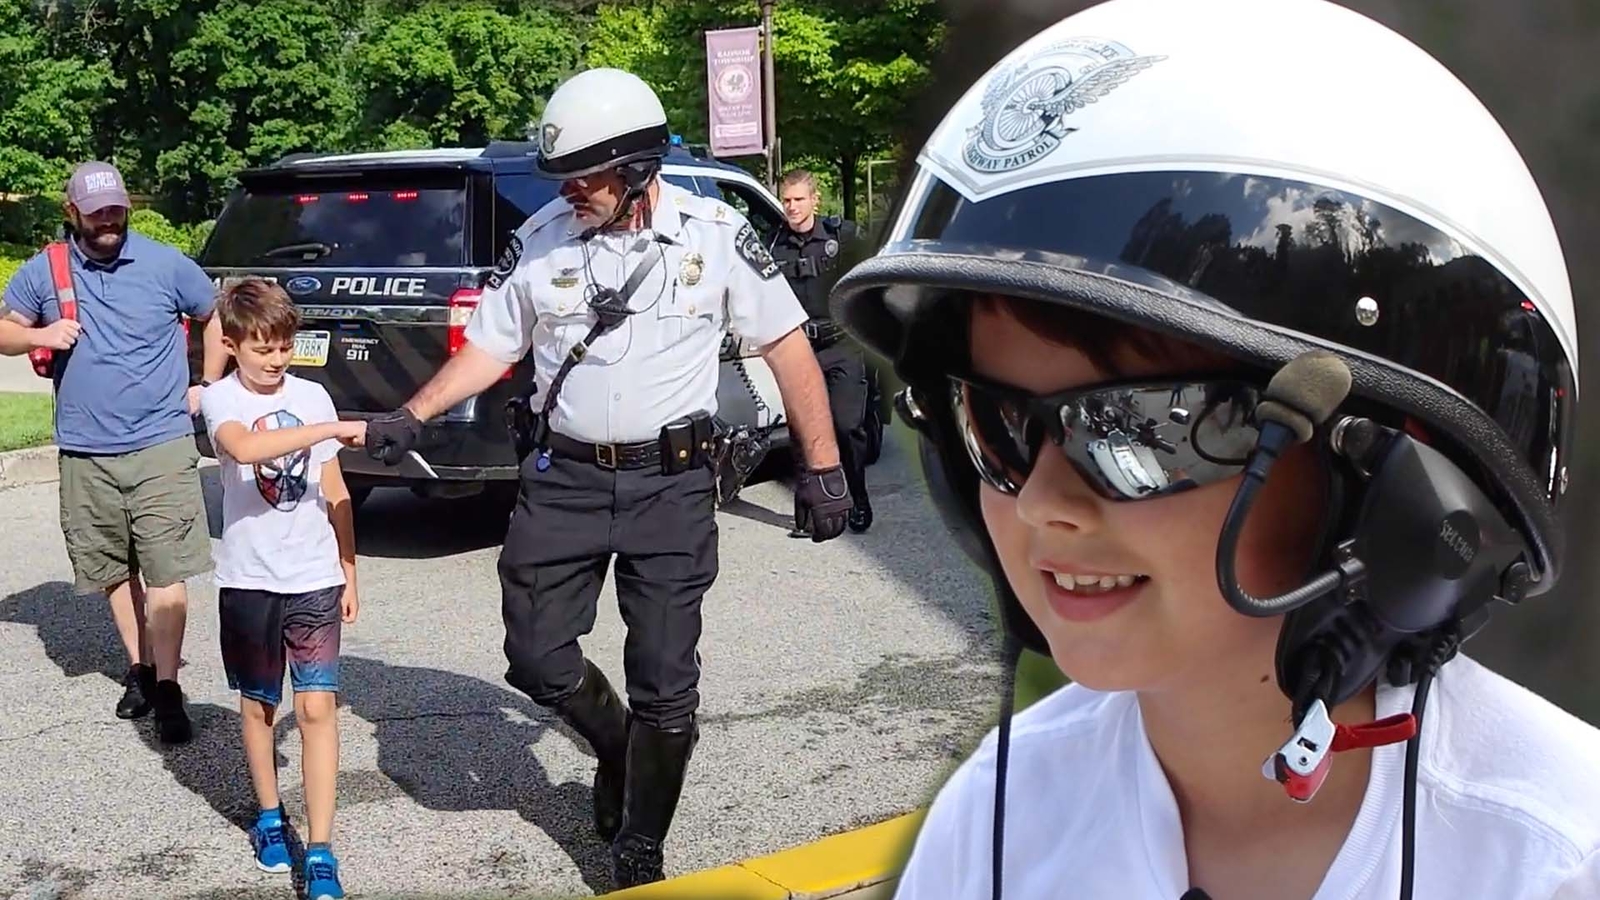   
																Radnor police swear in second-grader as chief for the day 
															 